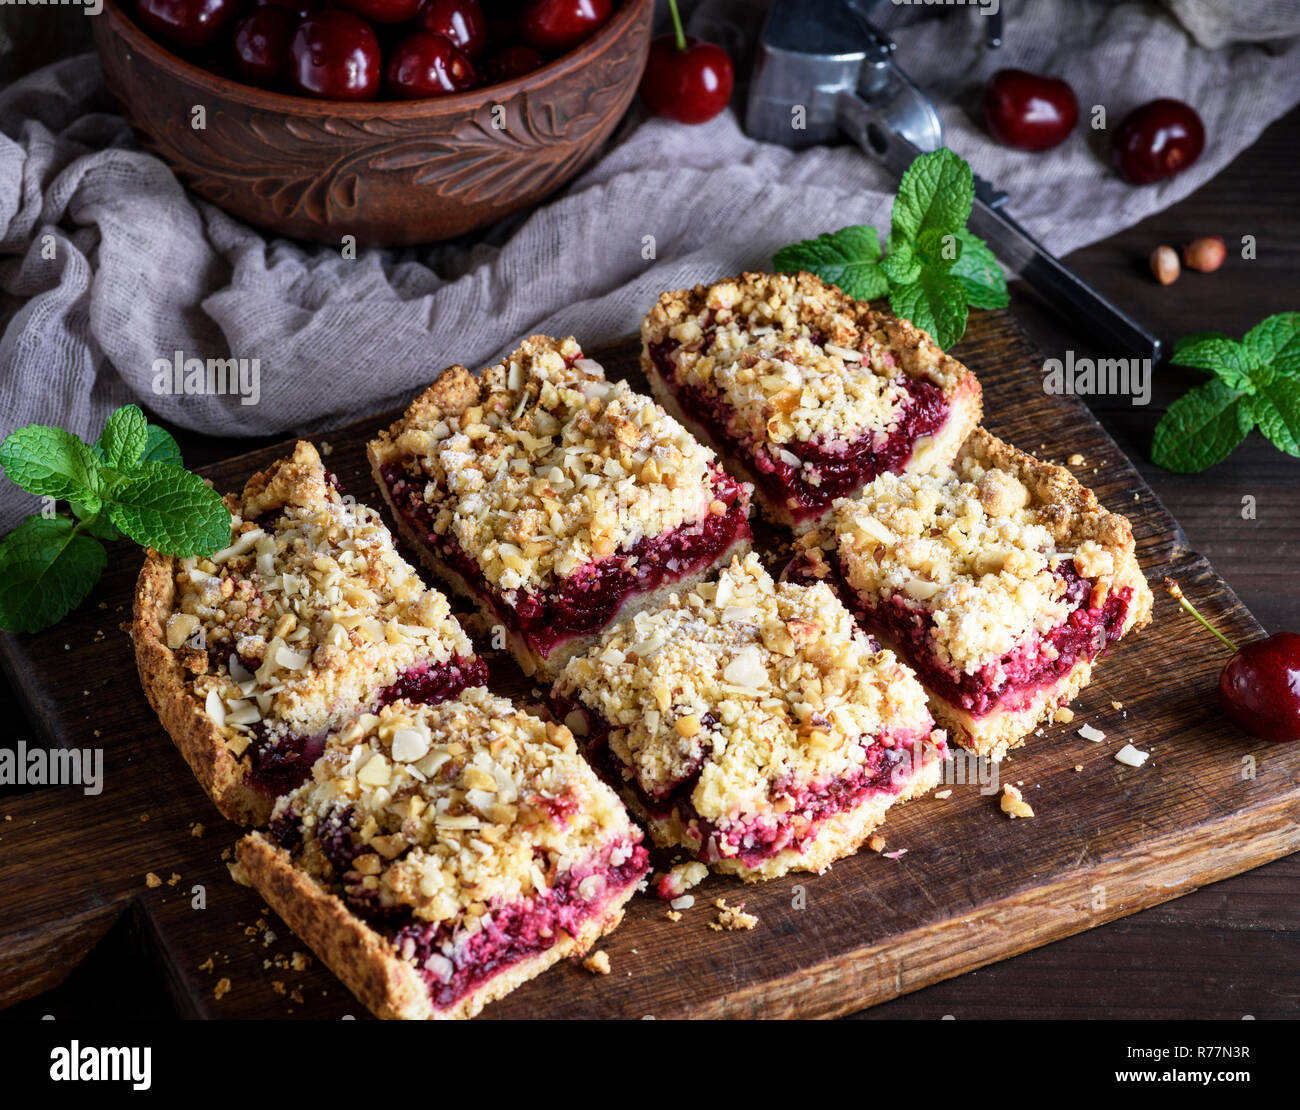 square pieces of cake crumble on brown wooden board Stock Photo